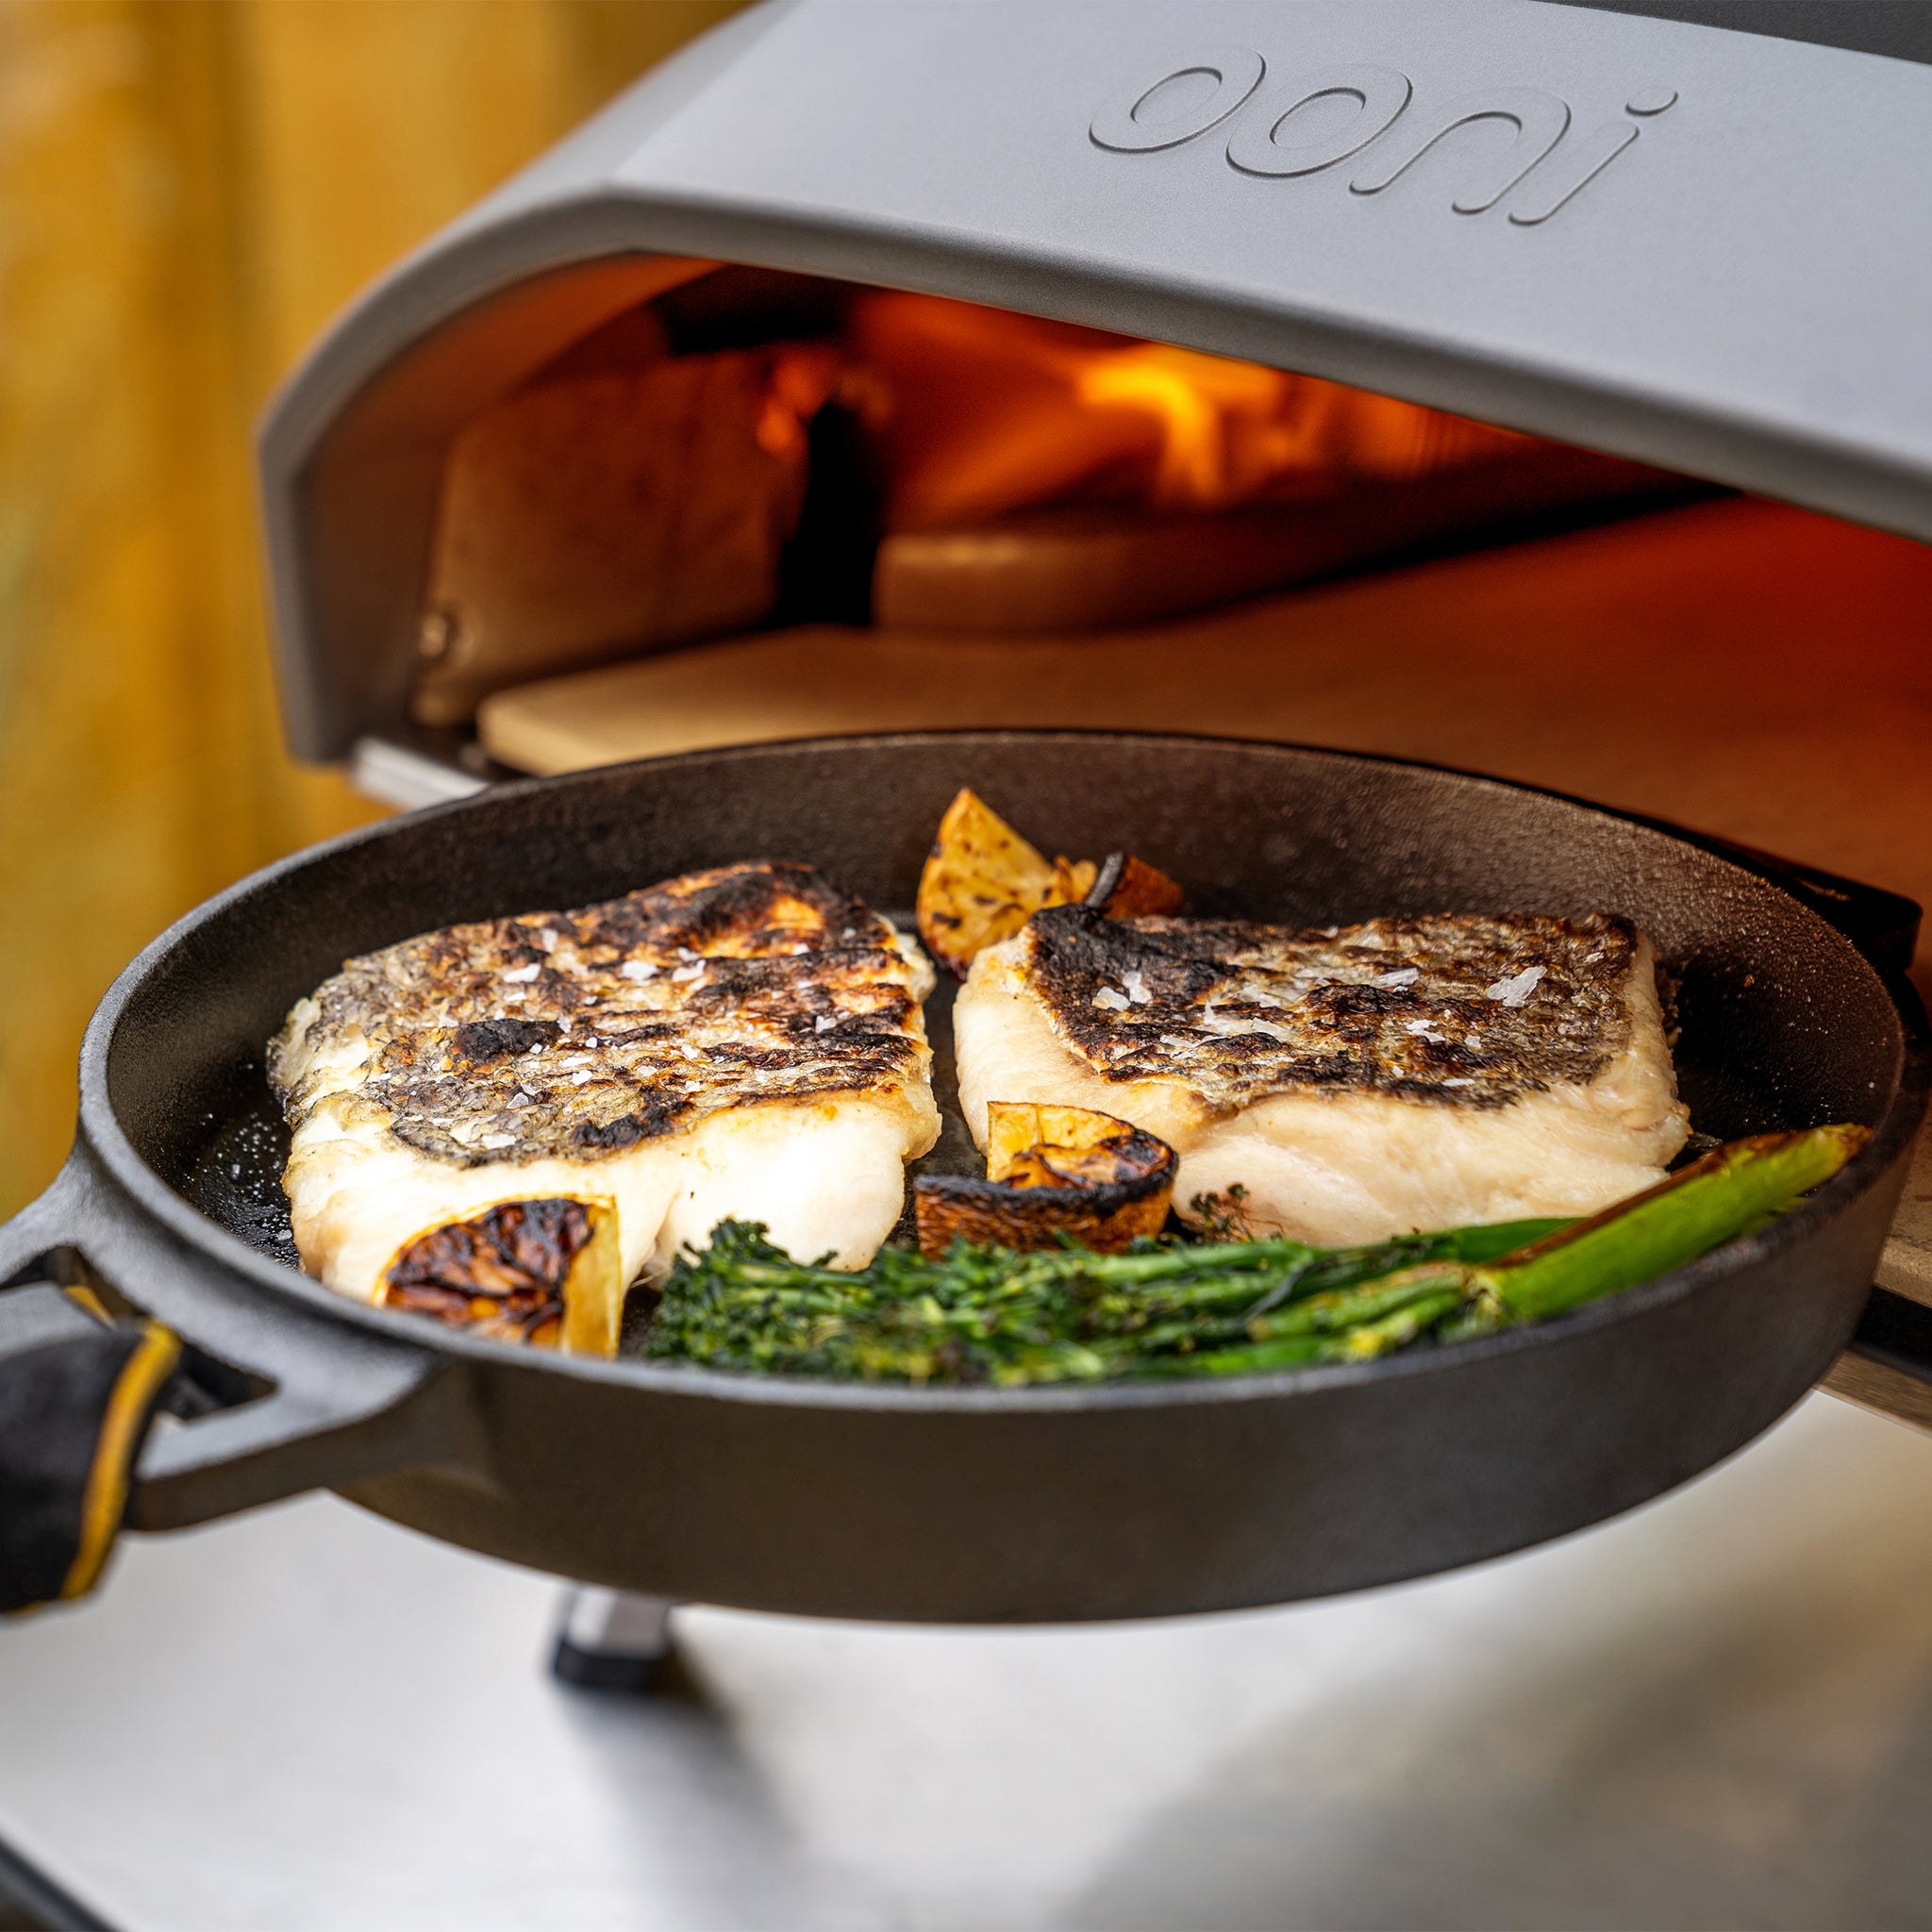 A Guide to Choosing the Right Cast Iron Pan — Ooni USA